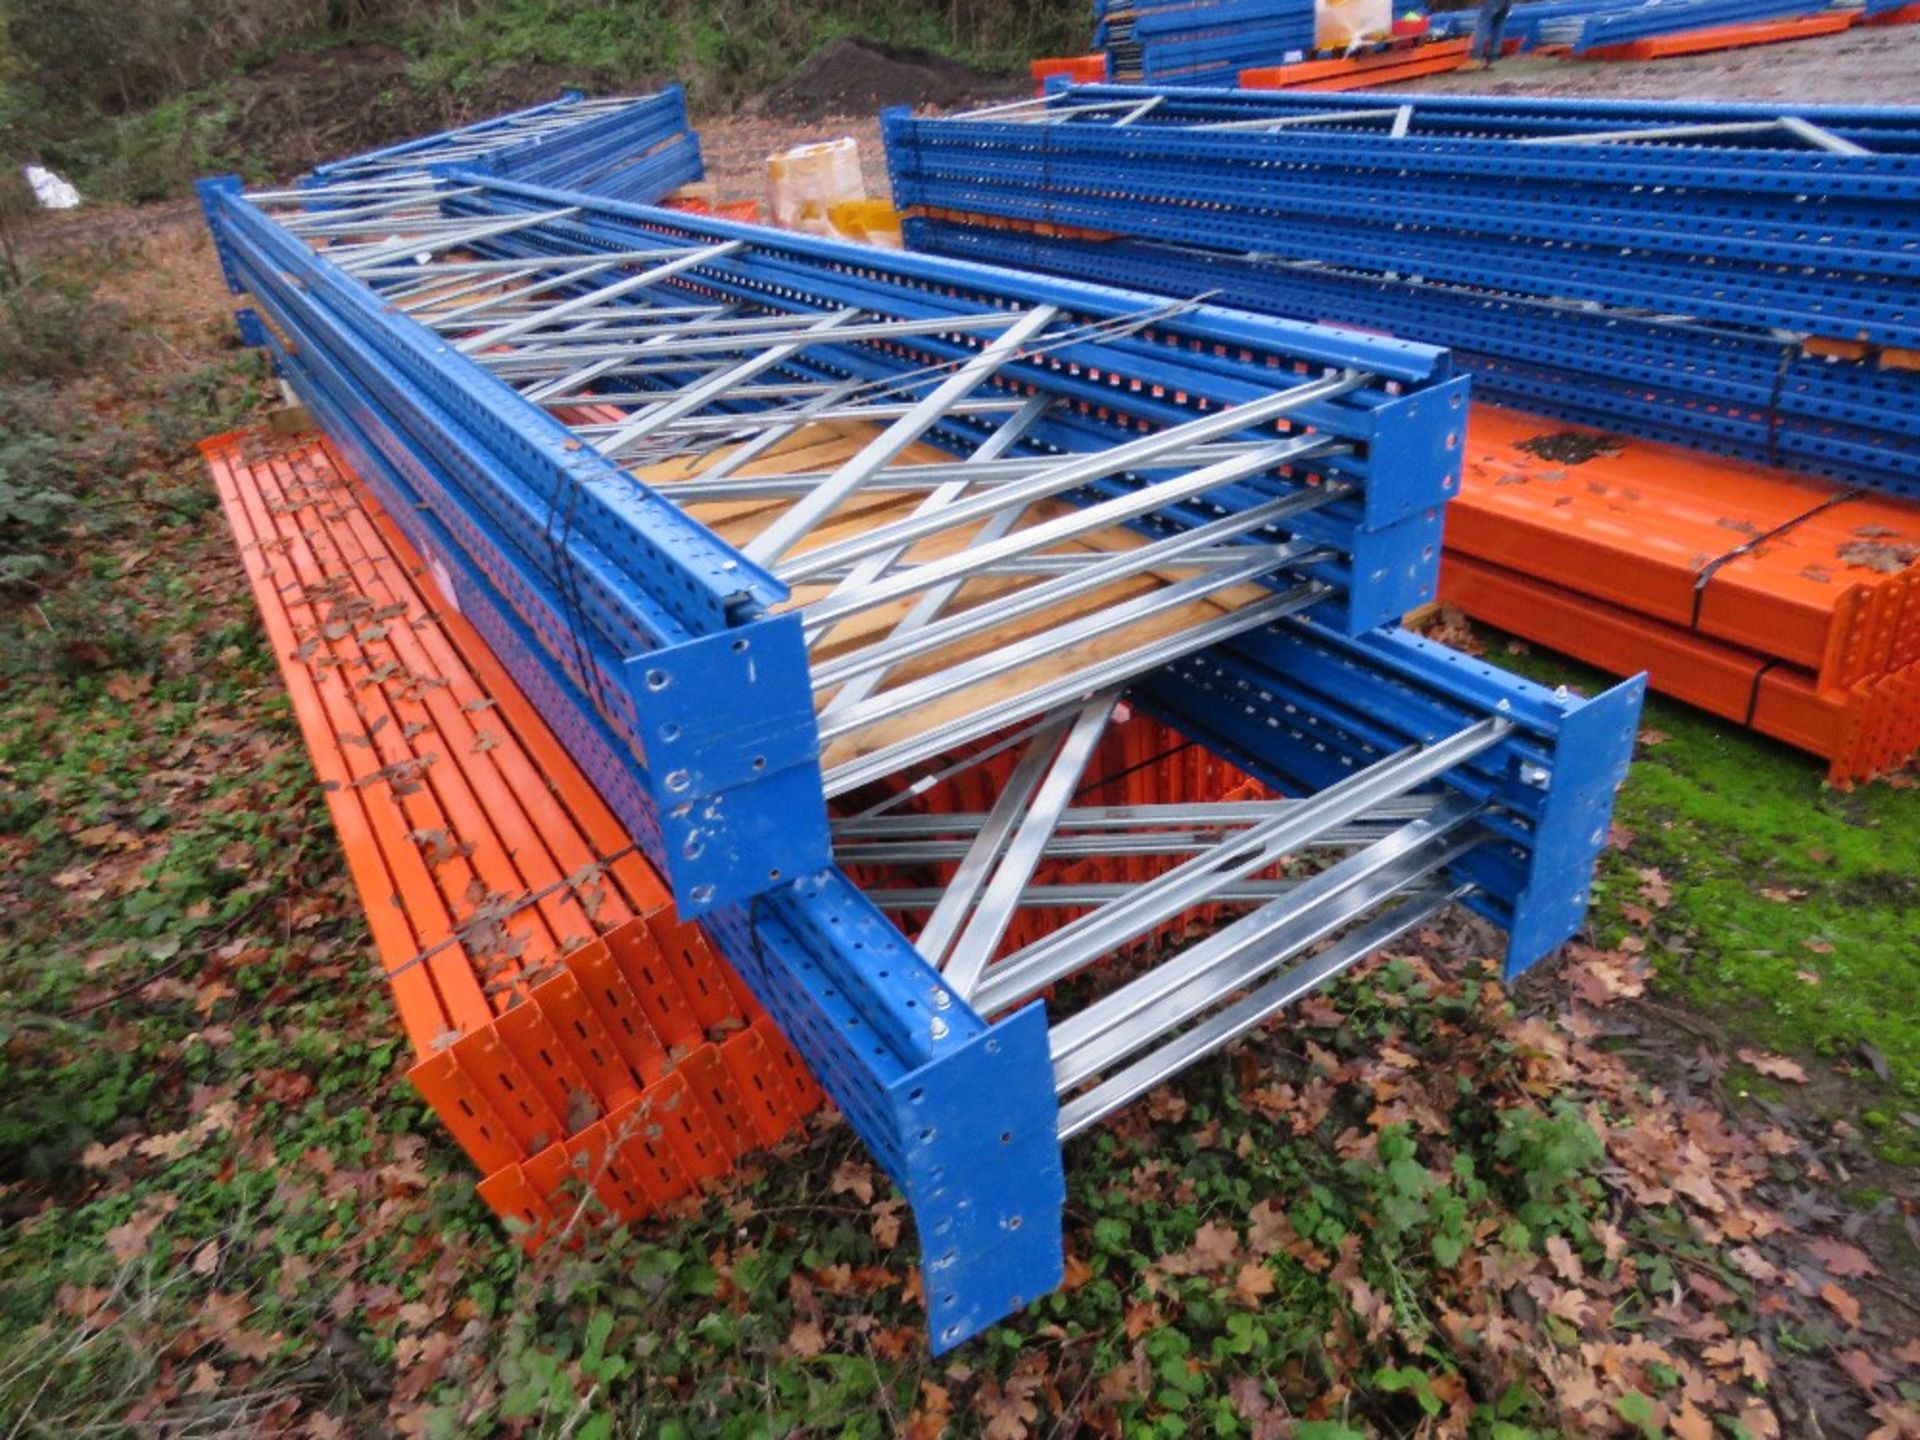 HEAVY DUTY PALLET RACKING: 10 X UPRIGHTS @ 5M HEIGHT WITH A WIDTH OF 0.9M, PLUS 54NO BEAMS @ 3.9M LE - Bild 3 aus 5